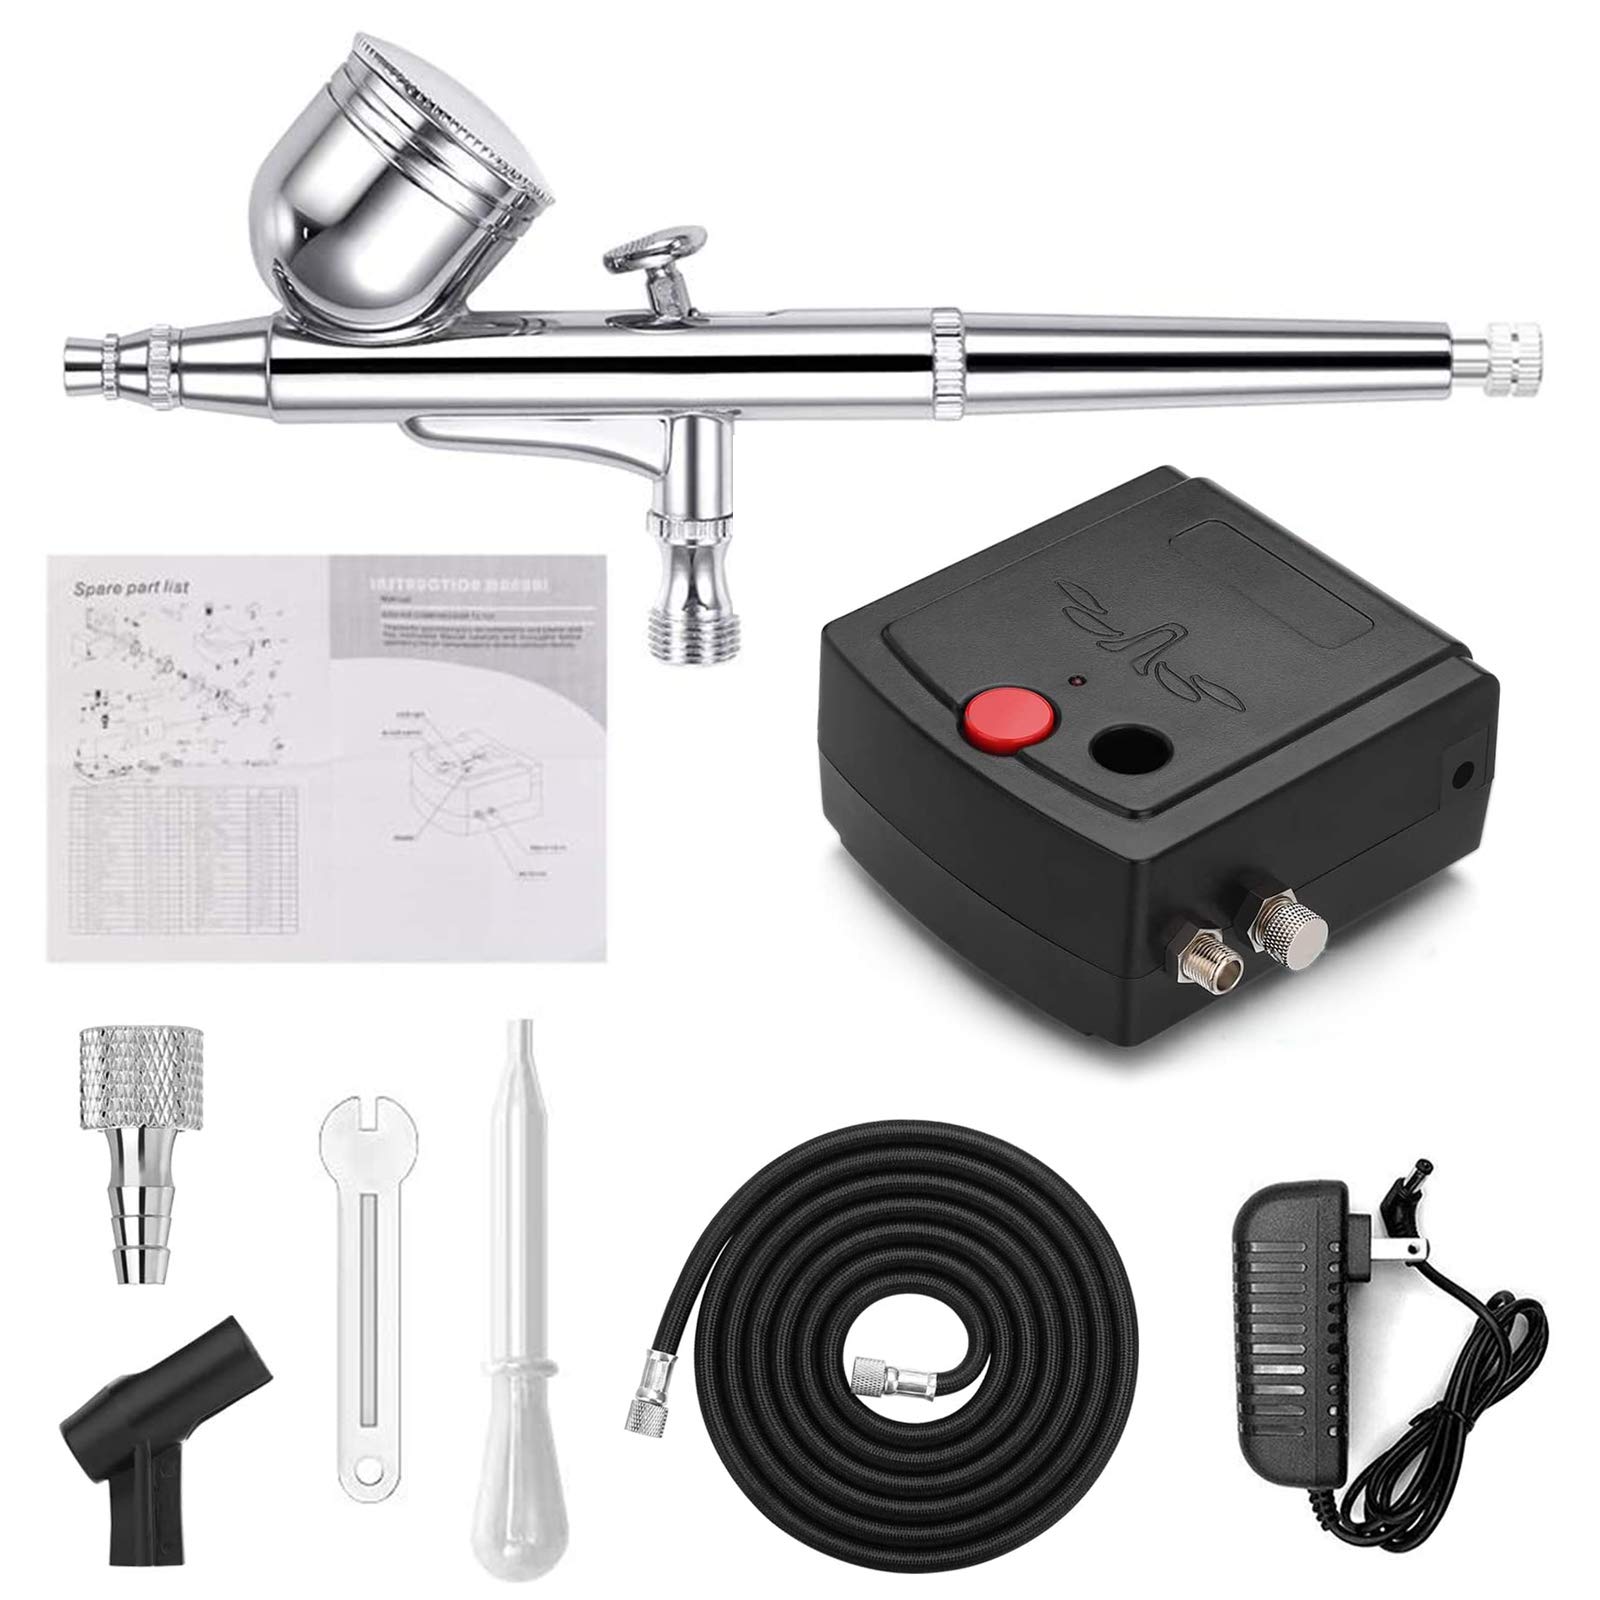 Airbrush Kit Portable Dual-Action Airbrush Gun and Mini Air Compressor Set for Make up,Art Painting,Tattoo,Cake,Manicure, Spray Model,Craft,and More